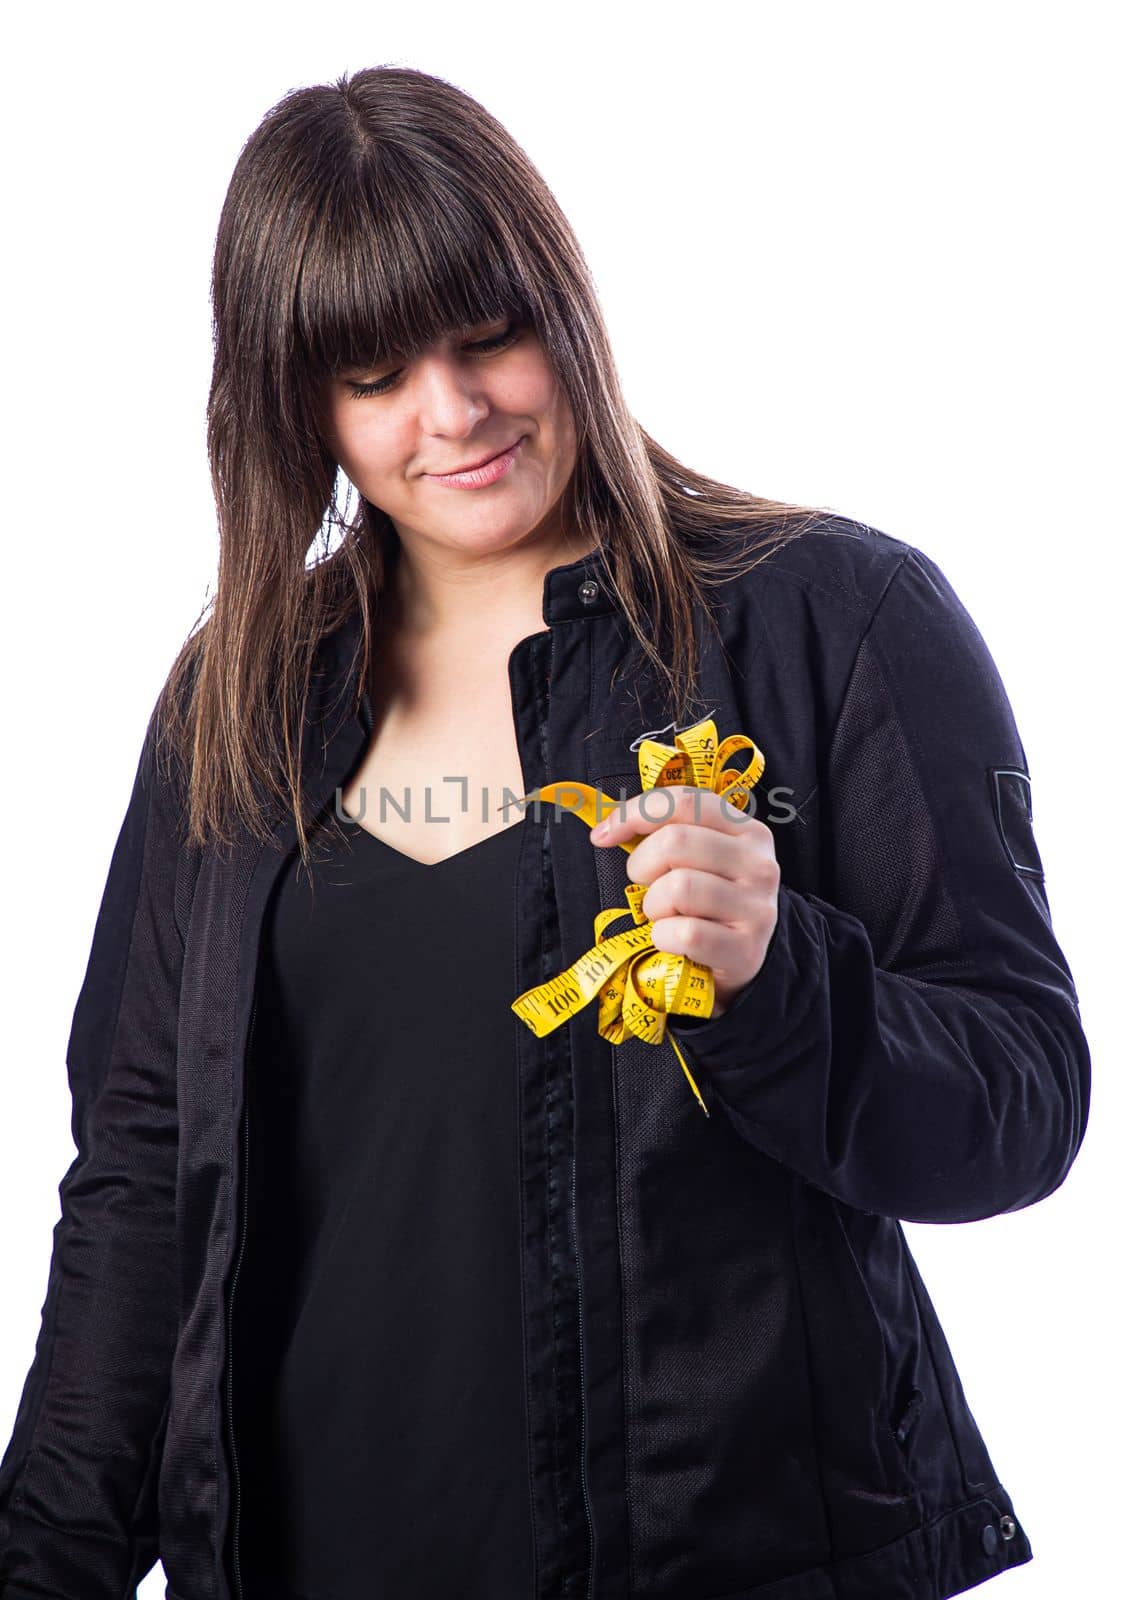 Isolated portrait of a forty year old woman, wearing a biker coat, holding a yellow mesuring tape